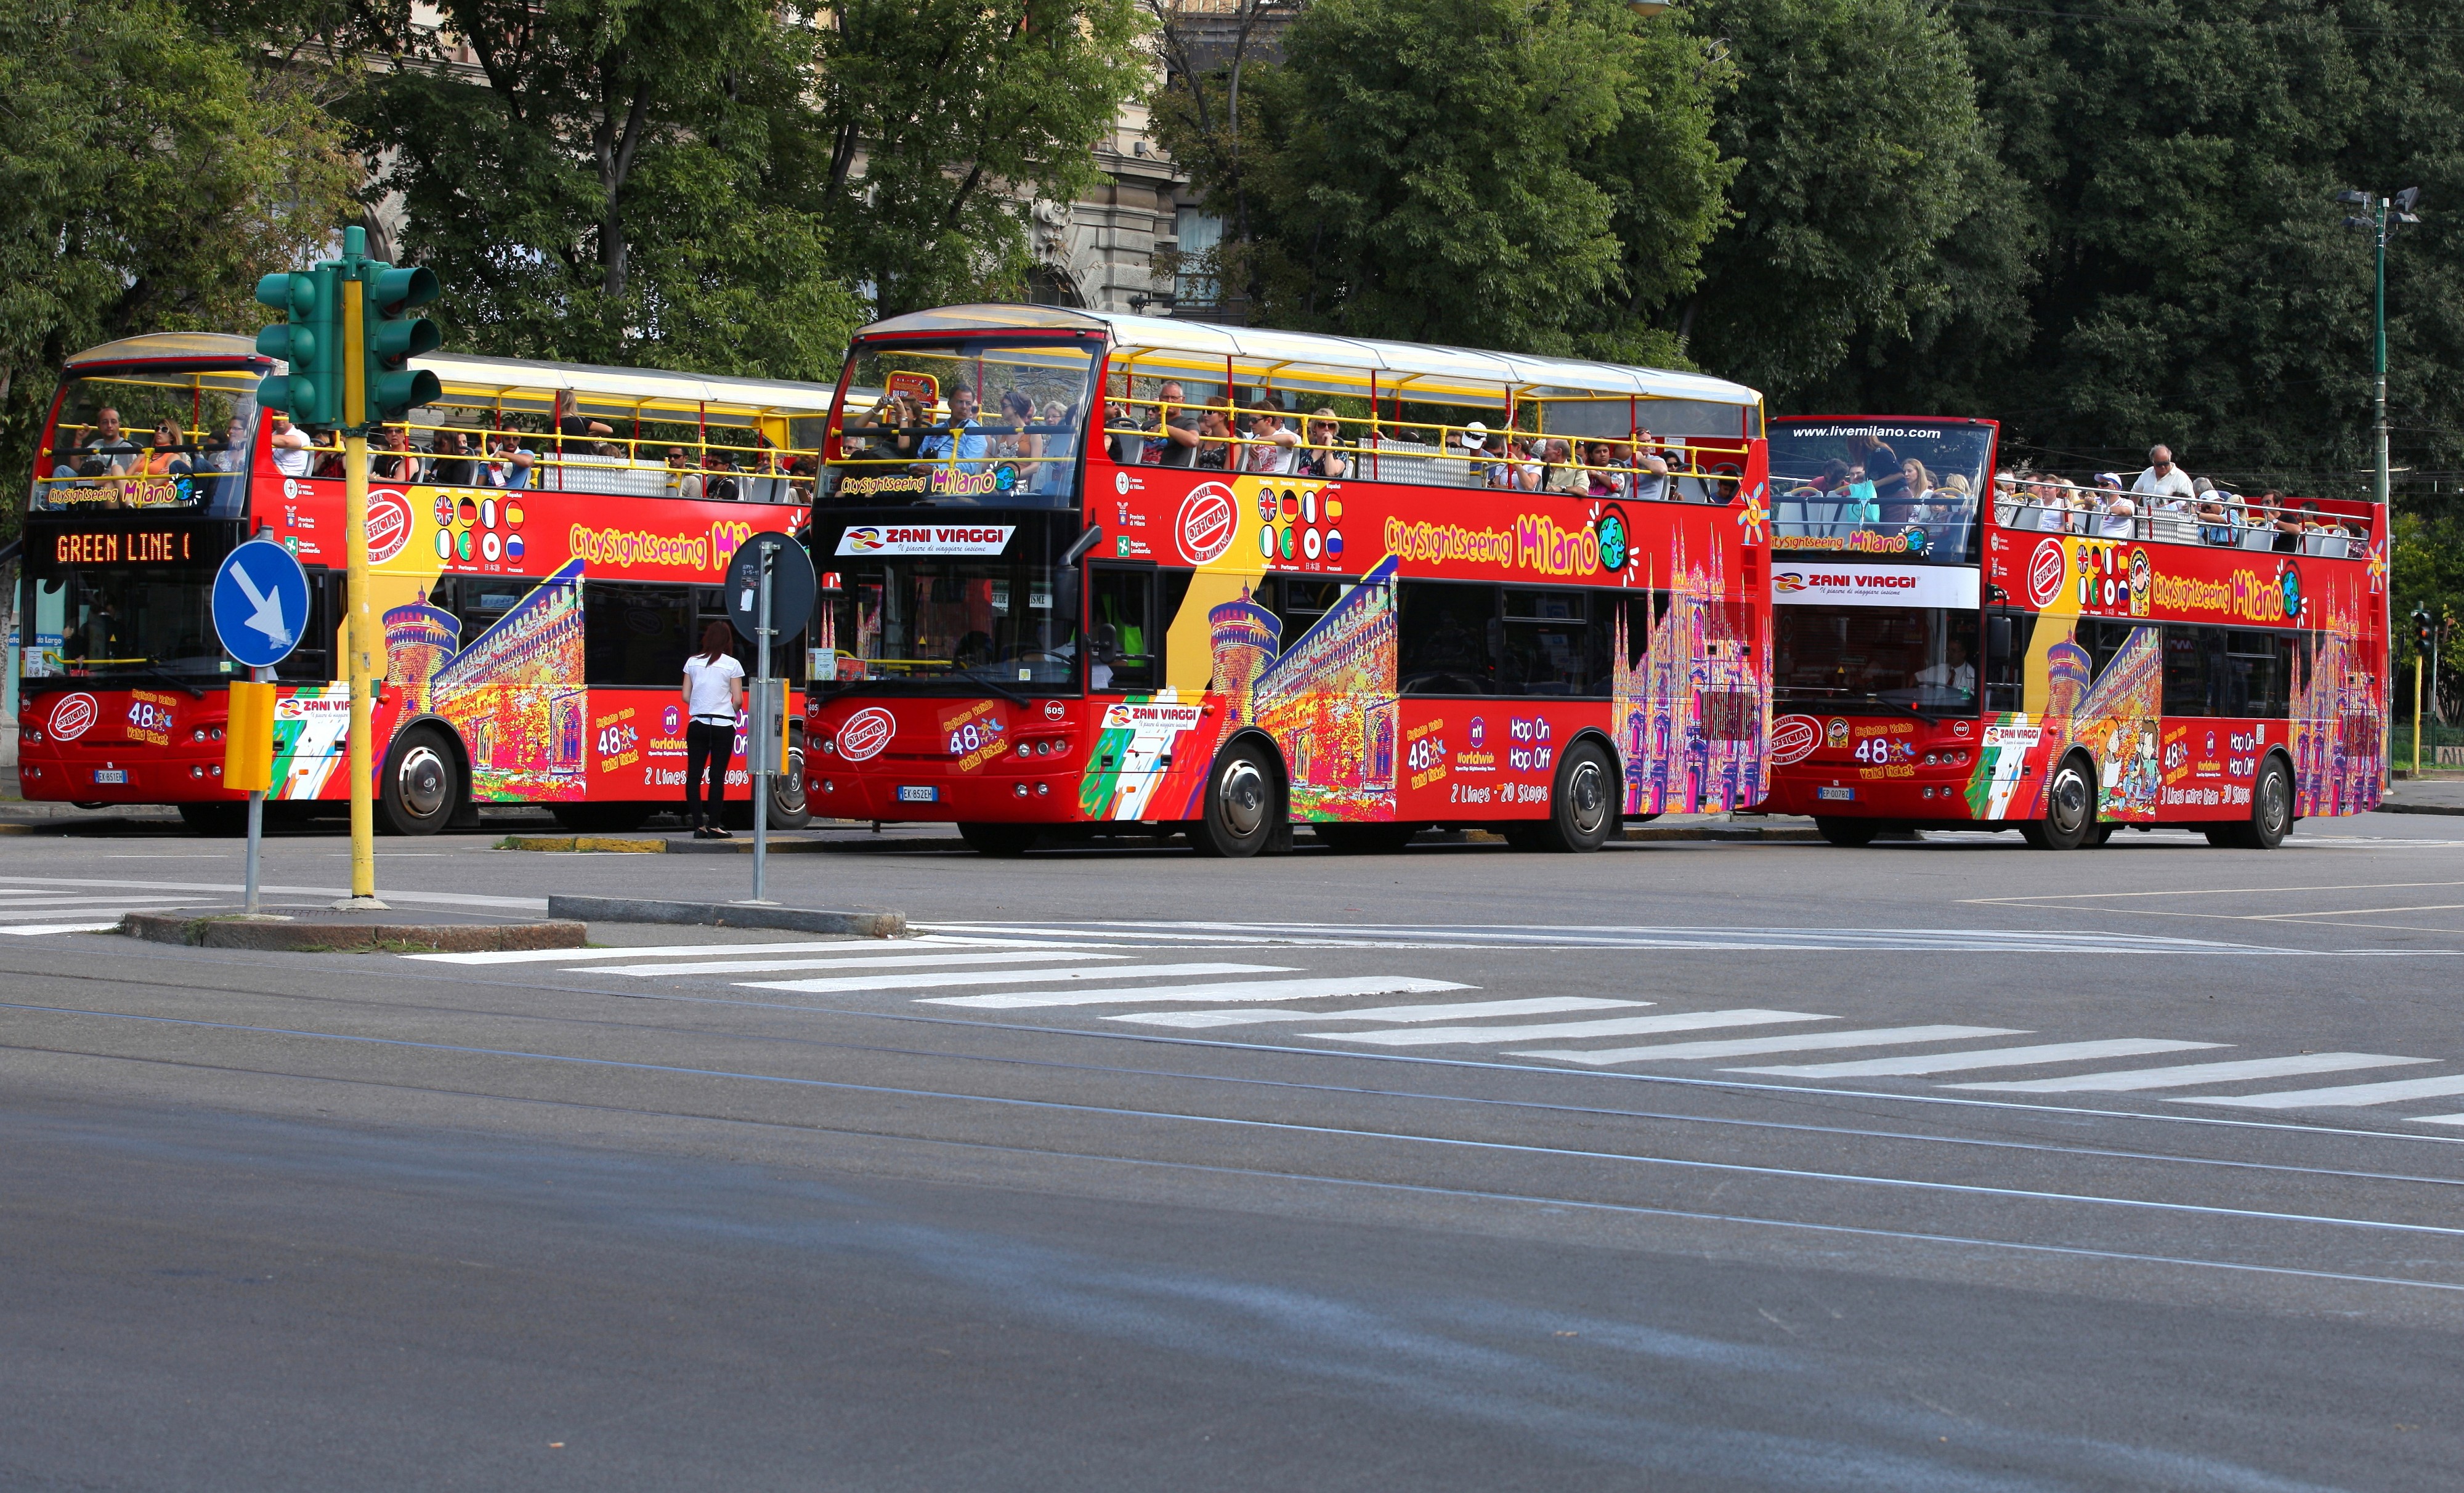 sightseeing buses in Milan, Italy, European Union, August 2013, picture 57